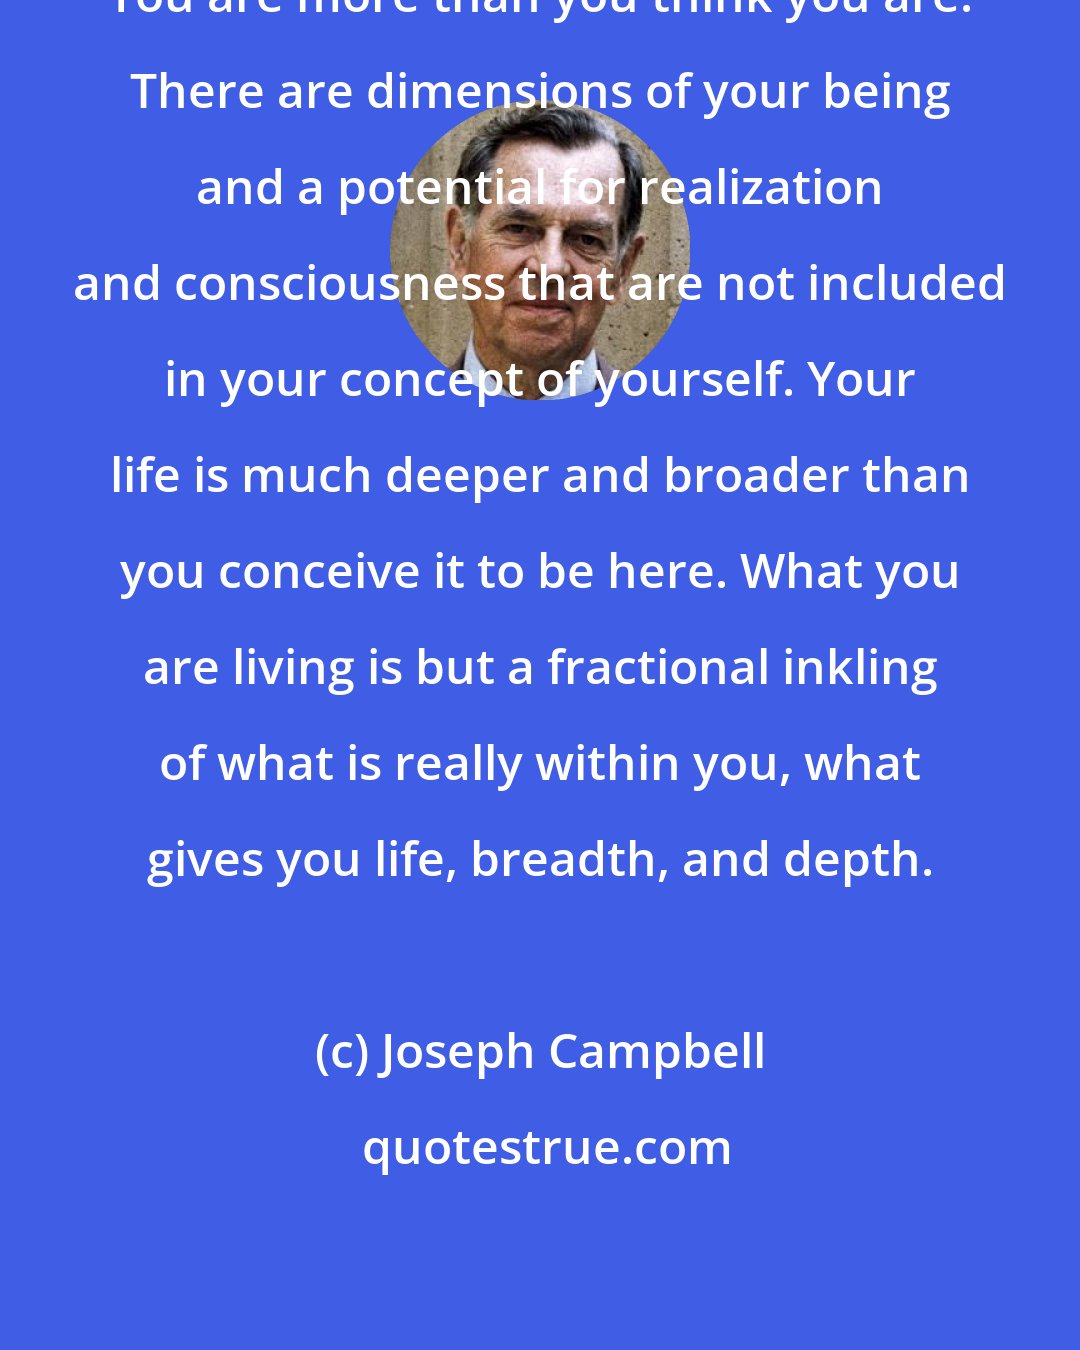 Joseph Campbell: You are more than you think you are. There are dimensions of your being and a potential for realization and consciousness that are not included in your concept of yourself. Your life is much deeper and broader than you conceive it to be here. What you are living is but a fractional inkling of what is really within you, what gives you life, breadth, and depth.